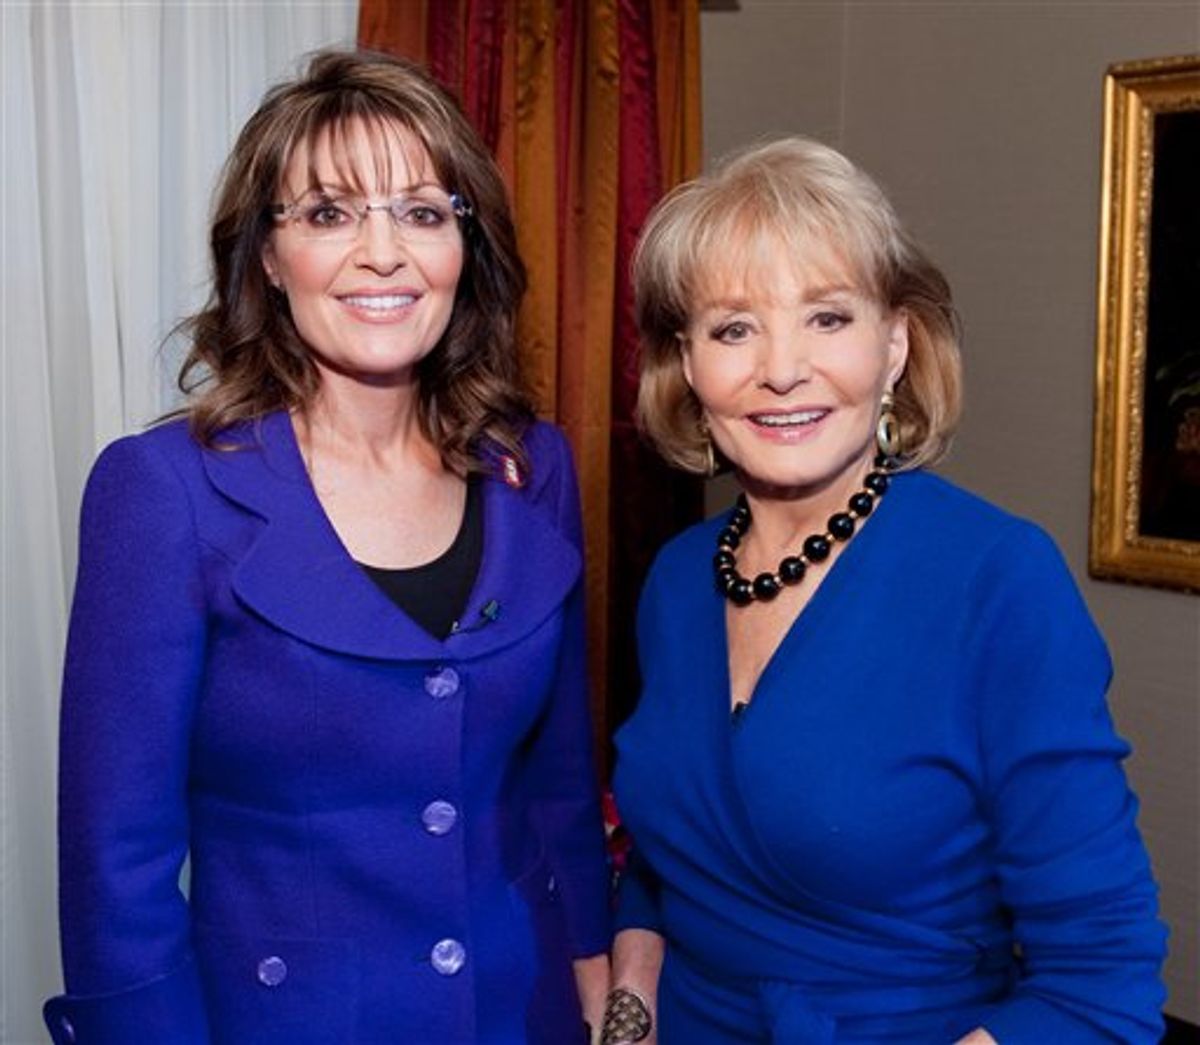 In this photo released by ABC, former Alaska Governor and Republican Vice-Presidential candidate Sarah Palin, left, is photographed with ABC's Barbara Walters, at a New York City hotel, Friday, Nov. 13, 2009. Walters' interview with Palin will air in segments starting with "Good Morning America," on Monday, Nov. 17. (AP Photo/ABC, Steve Fenn) ** MAGS OUT; NO SALES **   (AP)